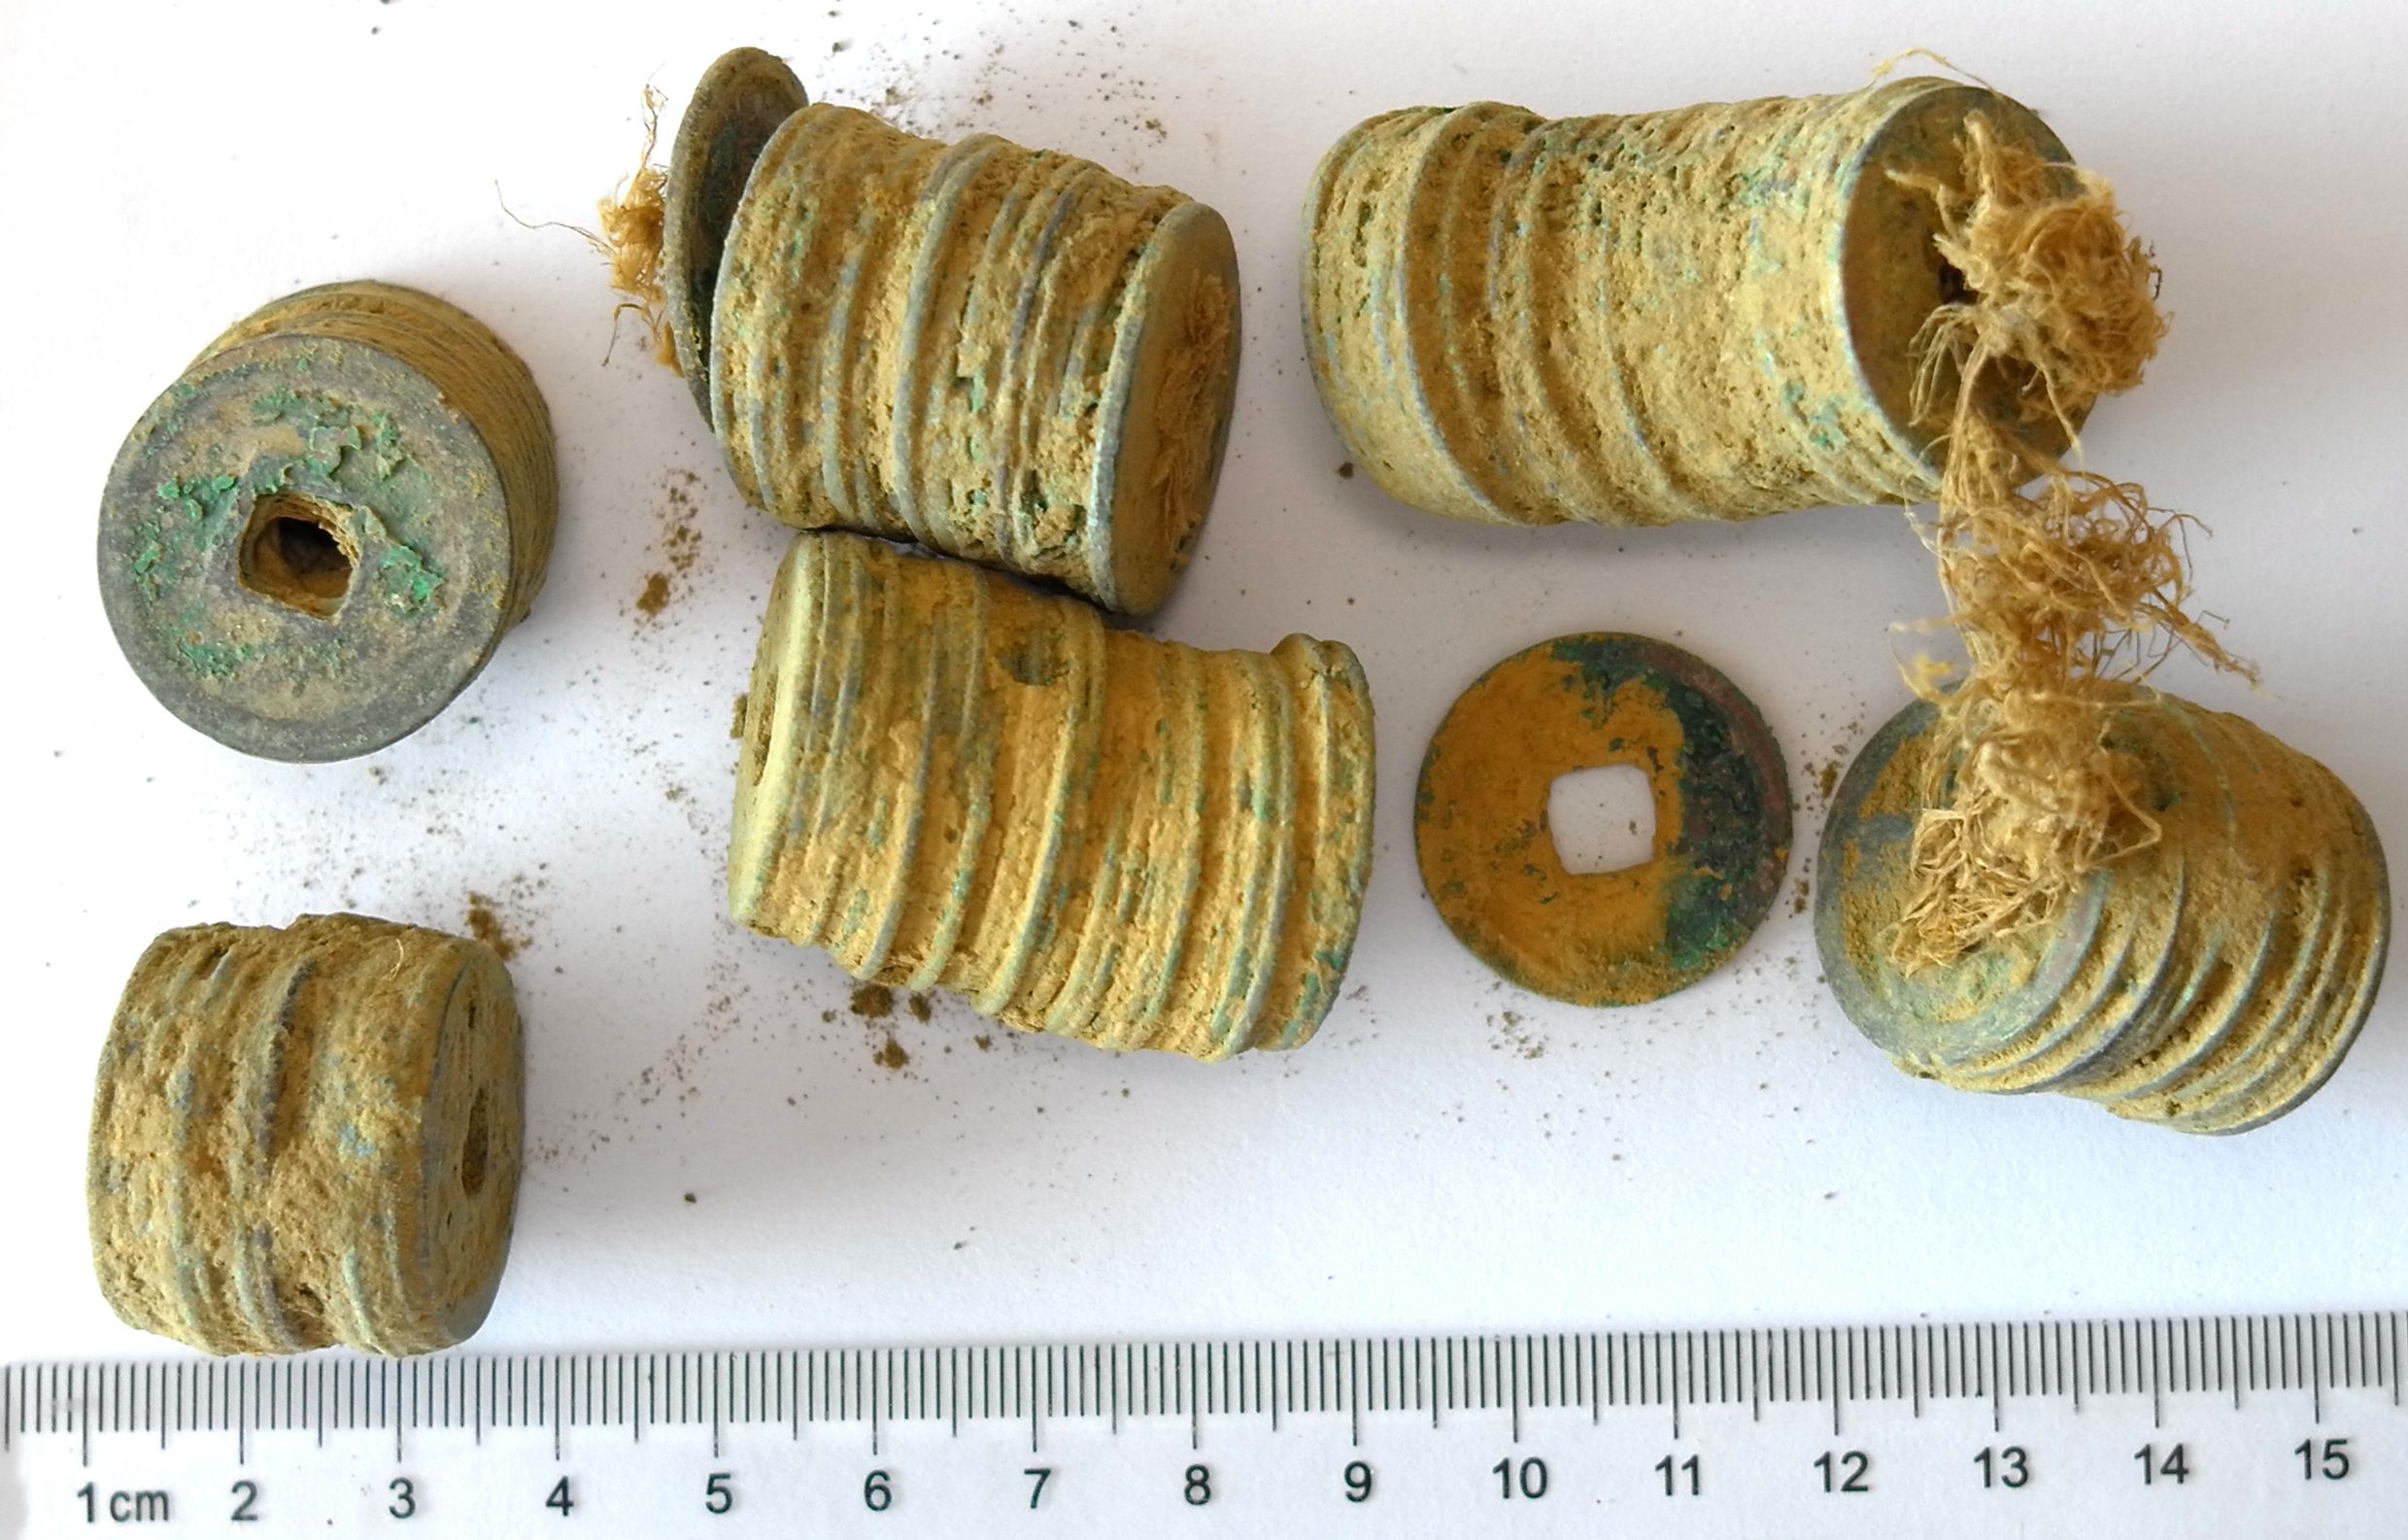 K7221, One Kilogram Uncleaned Coins in clumps, China North Sung Dynasty AD 1000-1100